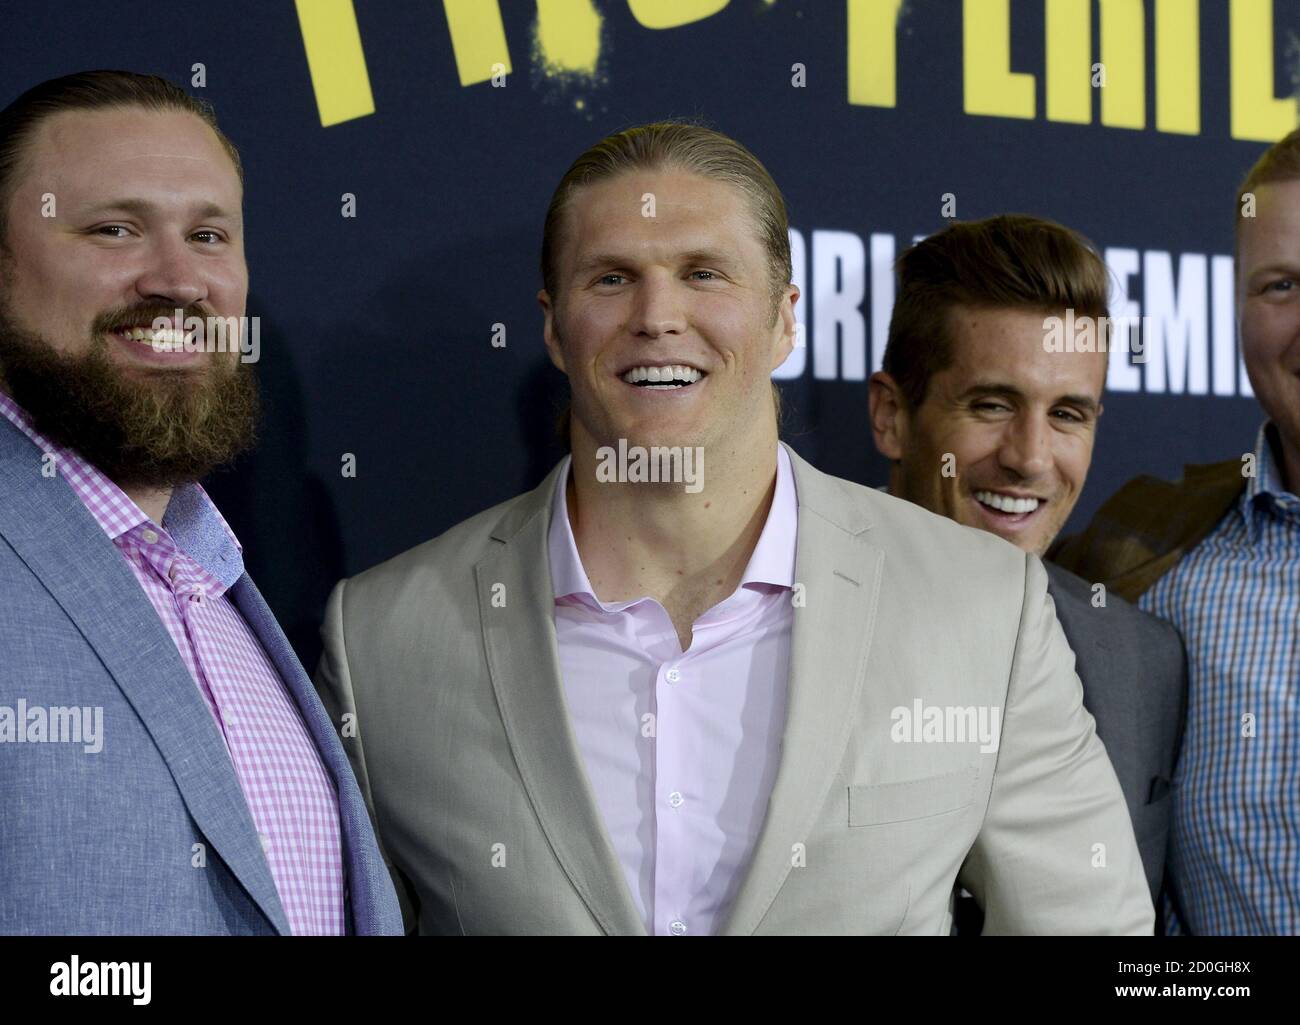 Cast member and Green Bay Packers football linebacker Clay Matthews (C)  poses with fellow teammates at the premiere of "Pitch Perfect 2" in Los  Angeles, California, United States May 8, 2015. The